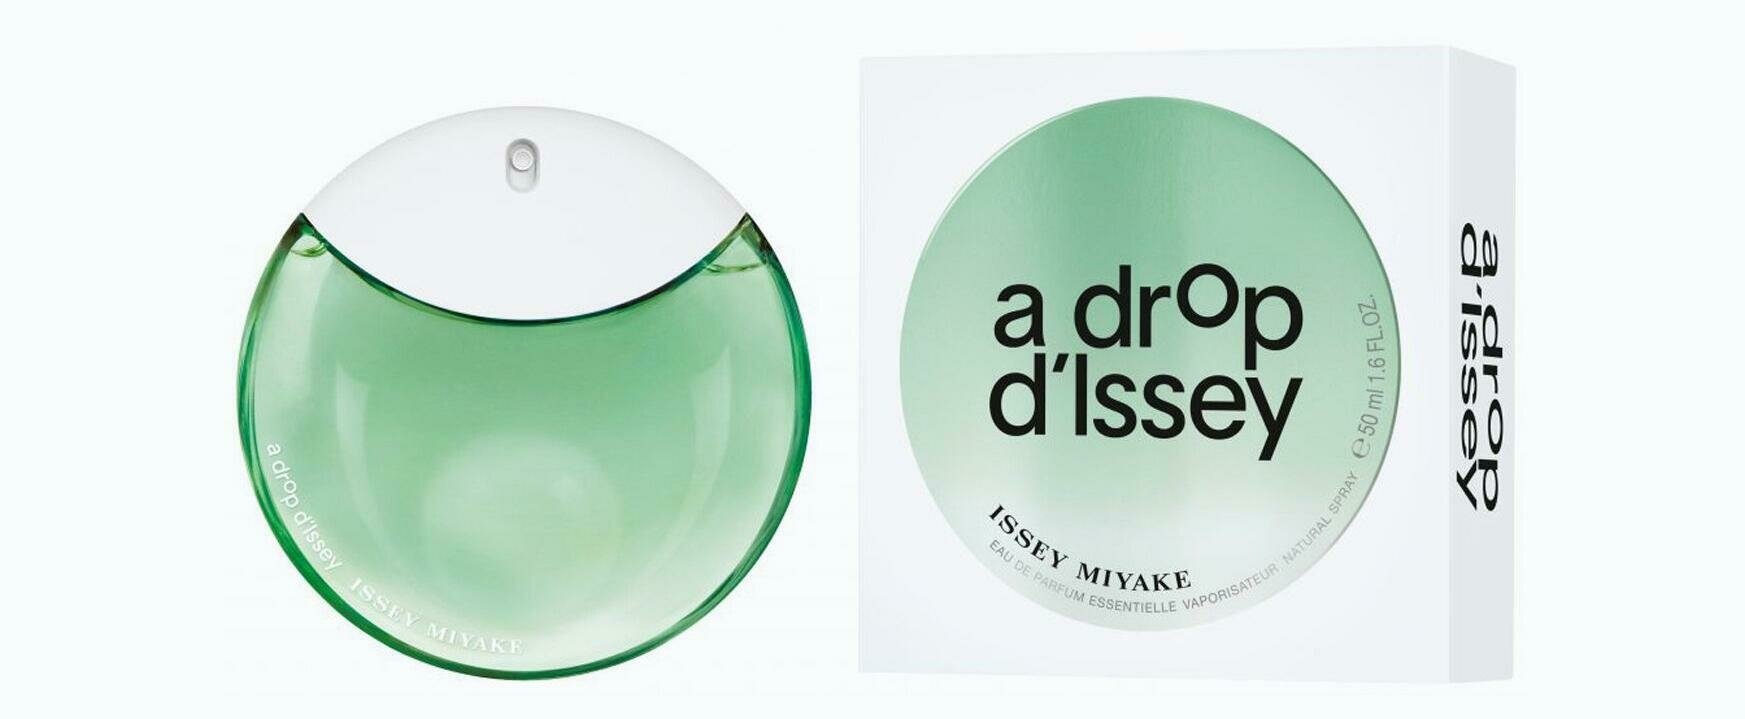 A New Fragrance Chapter in the History of the Drop: "A Drop d'Issey (Eau de Parfum Essentielle)" by Issey Miyake